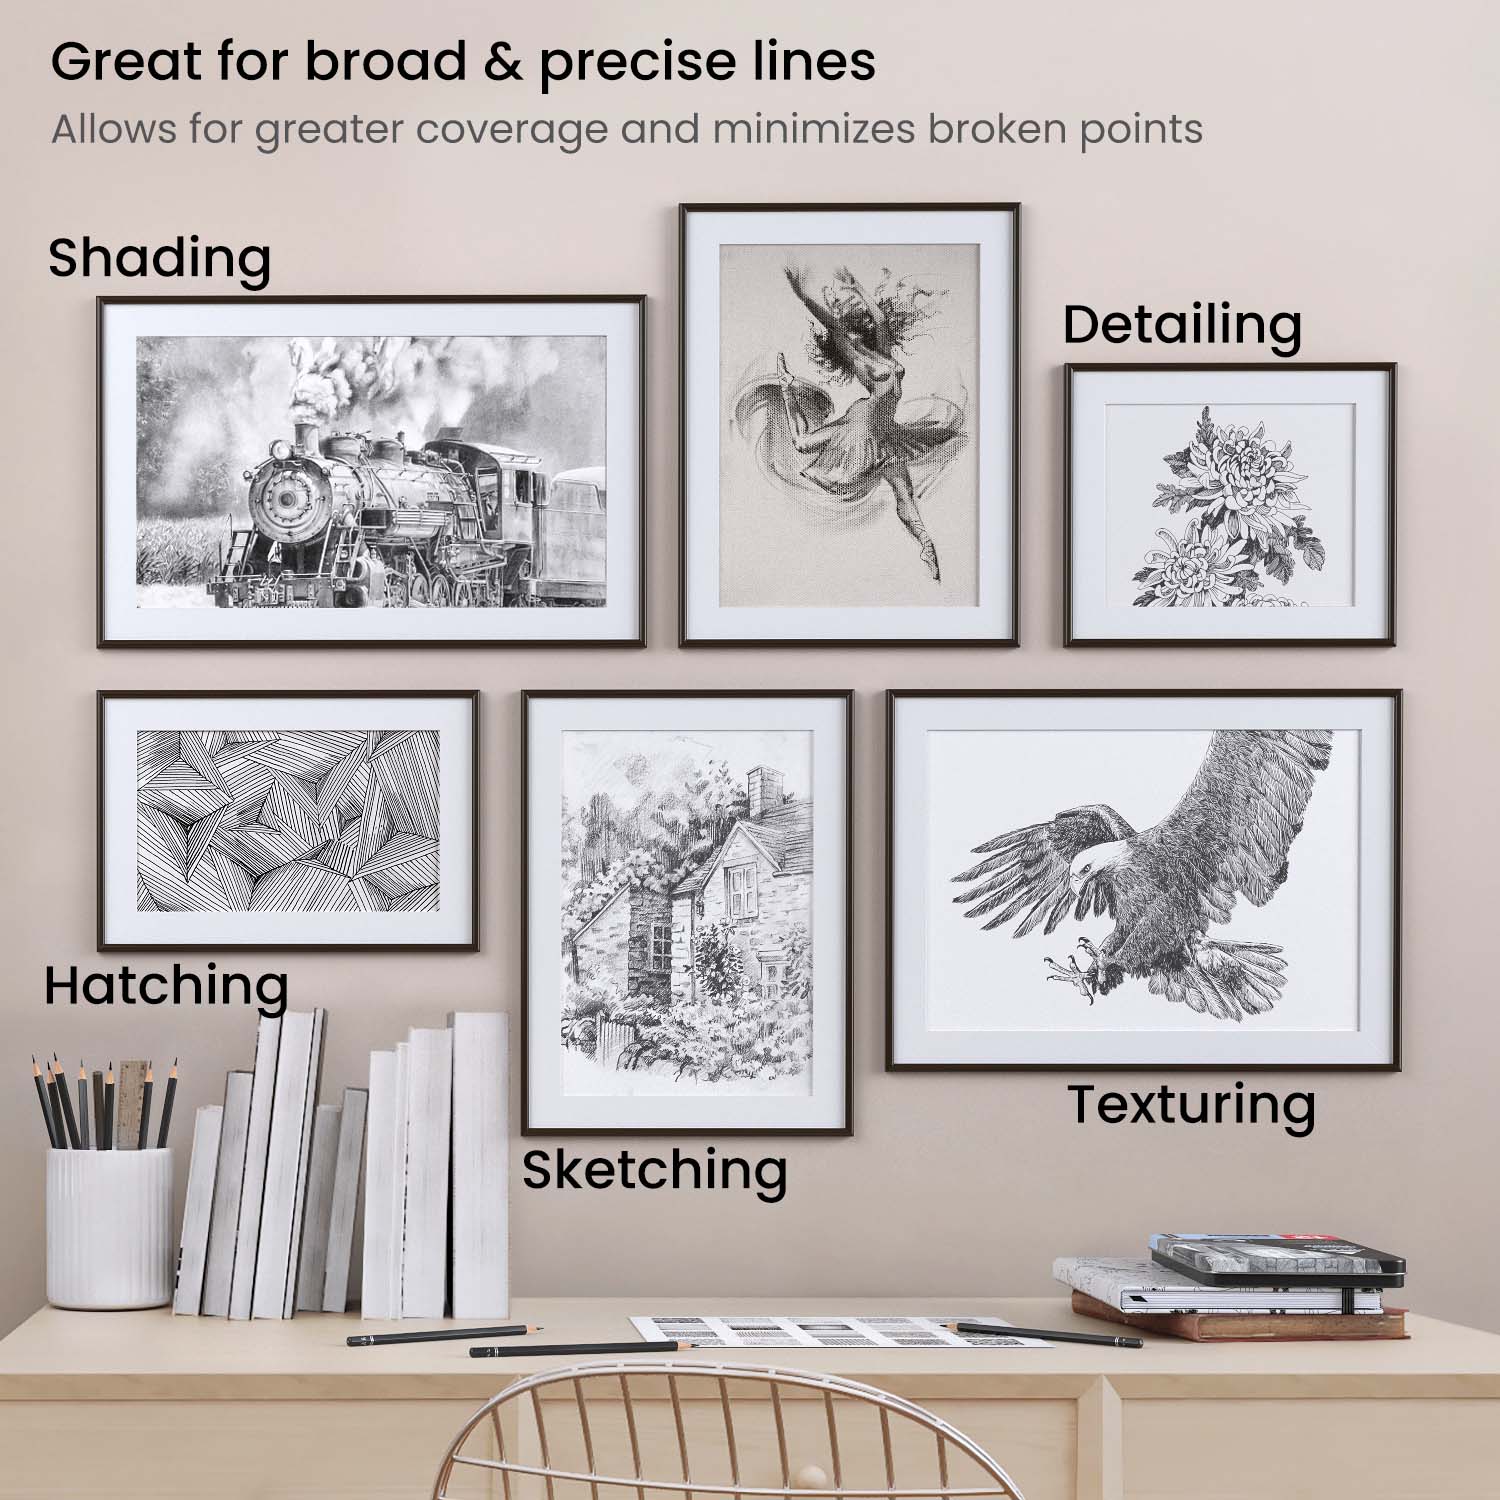 Sketching, Detailing, Texturing, Shading, and Hatching with Pro Series Drawing Pencils